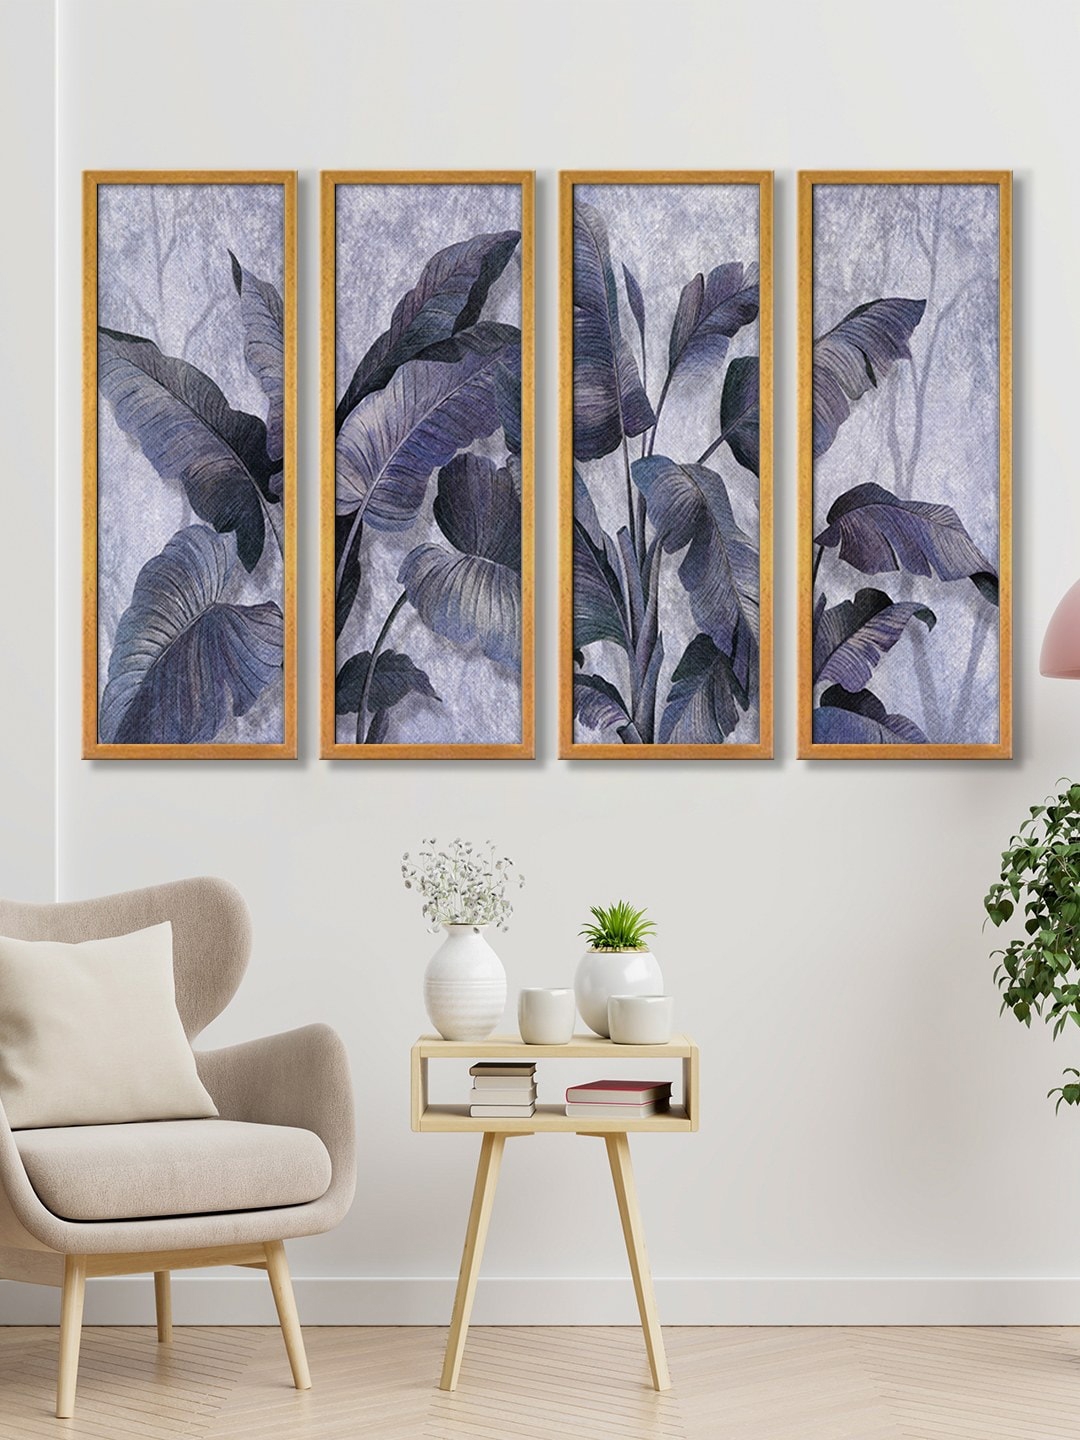 999Store Blue & Grey Set of 4 Big Leaves Wall Art Canvas Painting